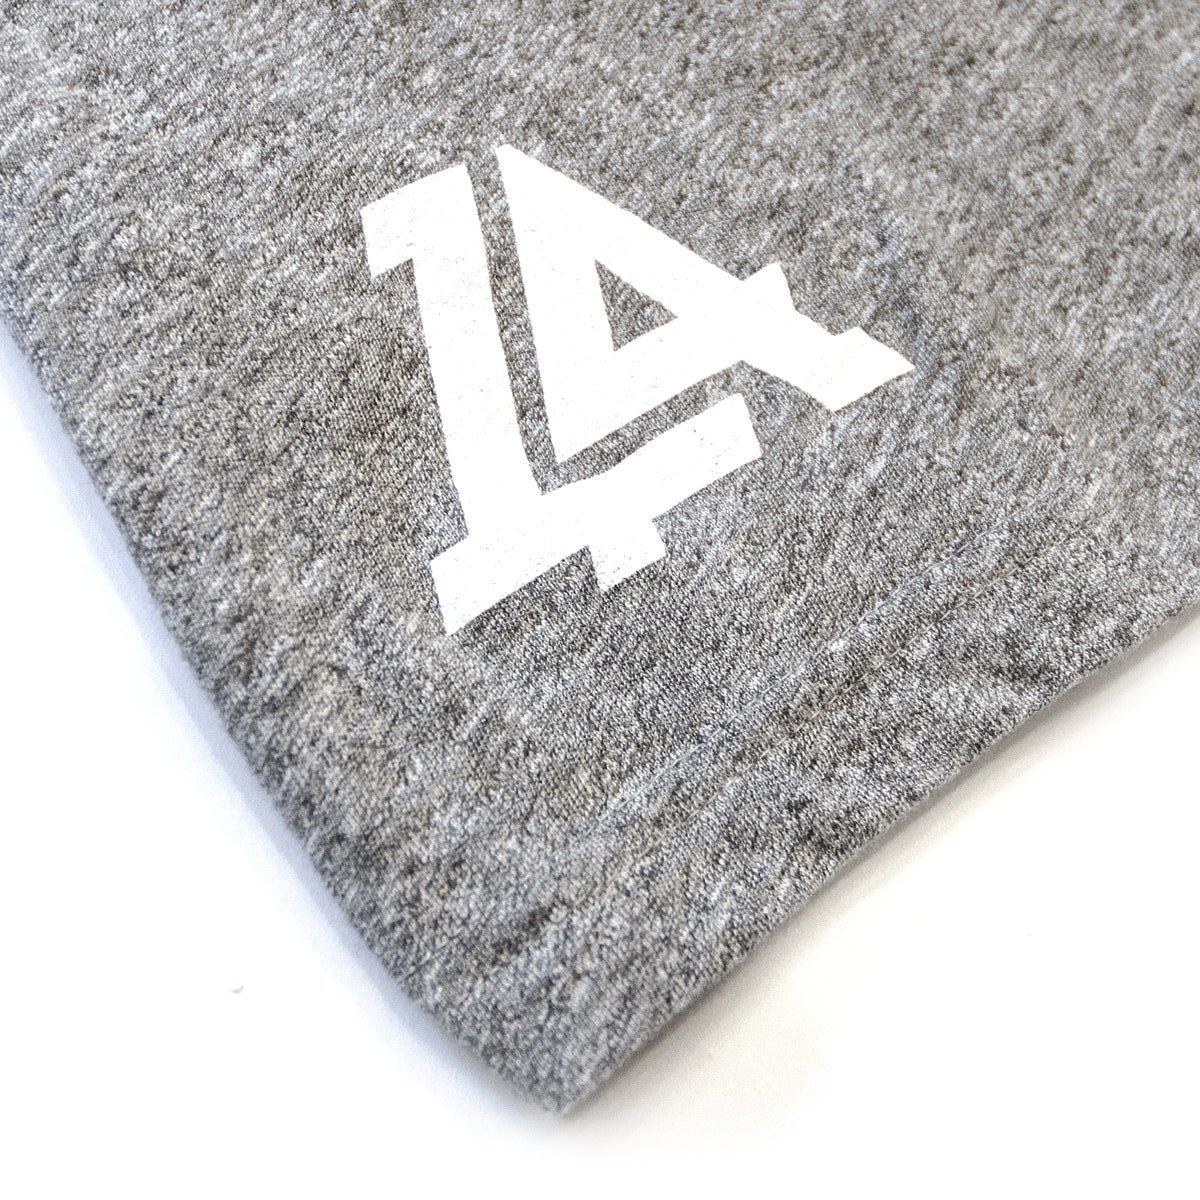 Lost Art Canada - white on grey vintage gridlock tee back logo view